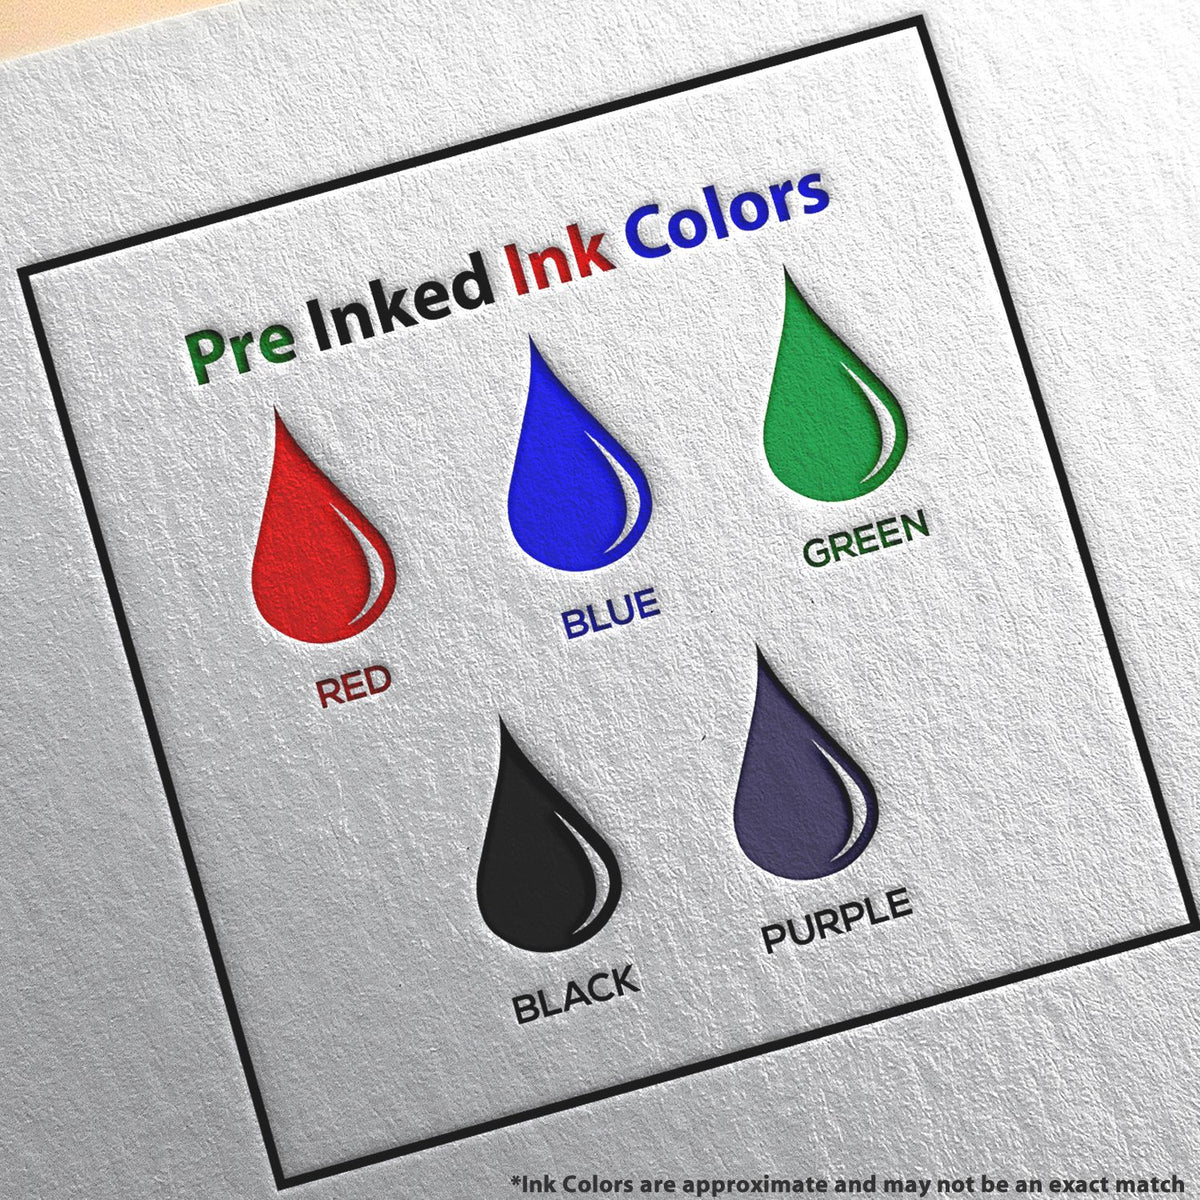 A picture showing the different ink colors or hues available for the Slim Pre-Inked Utah Land Surveyor Seal Stamp product.